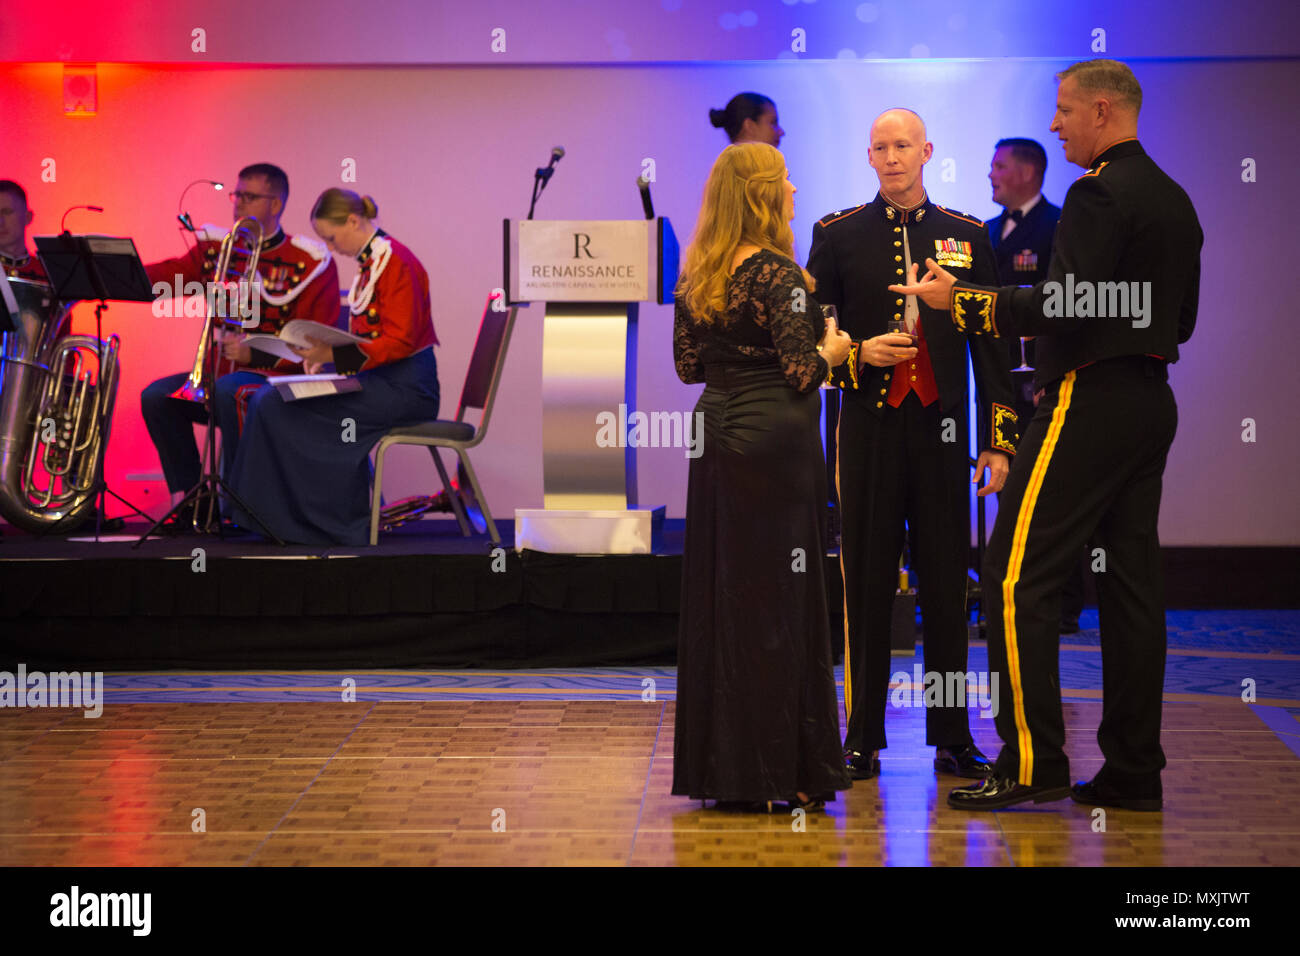 U.S. Marine Corps Brig. Gen. James F. Glynn, director, Office of United State Marine Corps Communication, speaks with guests during the Headquarters & Service Battalion Marine Corps Ball at the Renaissance Arlington Capitol View Hotel, Arlington, Va., Nov. 05, 2016. The ball was held in celebration of the Marine Corps’ 241st birthday. (U.S. Marine Corps photo by Pfc. Alex A. Quiles) Stock Photo